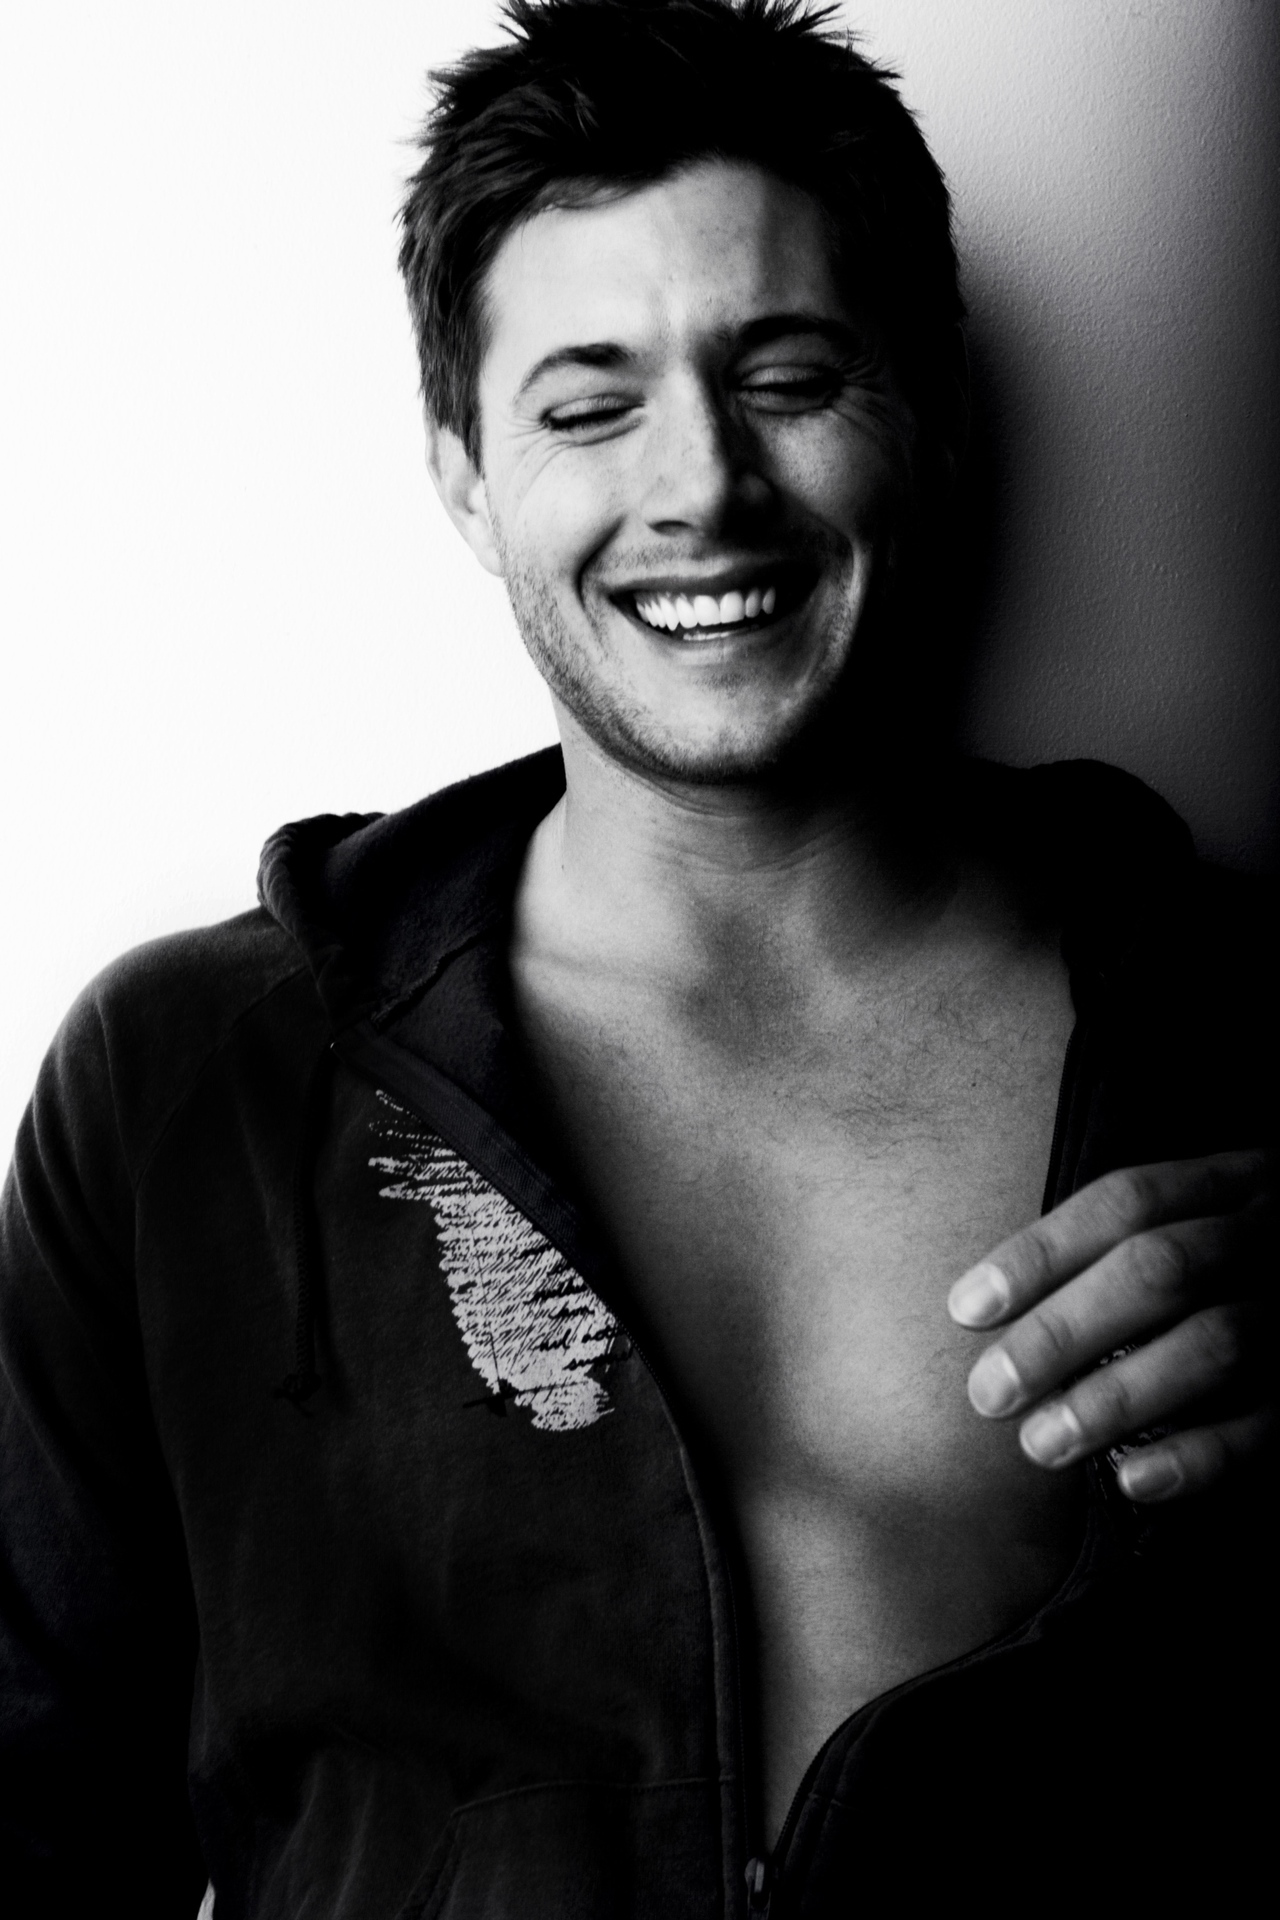 11696 Screensavers and Wallpapers Jensen Ackles for phone. Download jensen ackles, people, actors, men, supernatural, black pictures for free